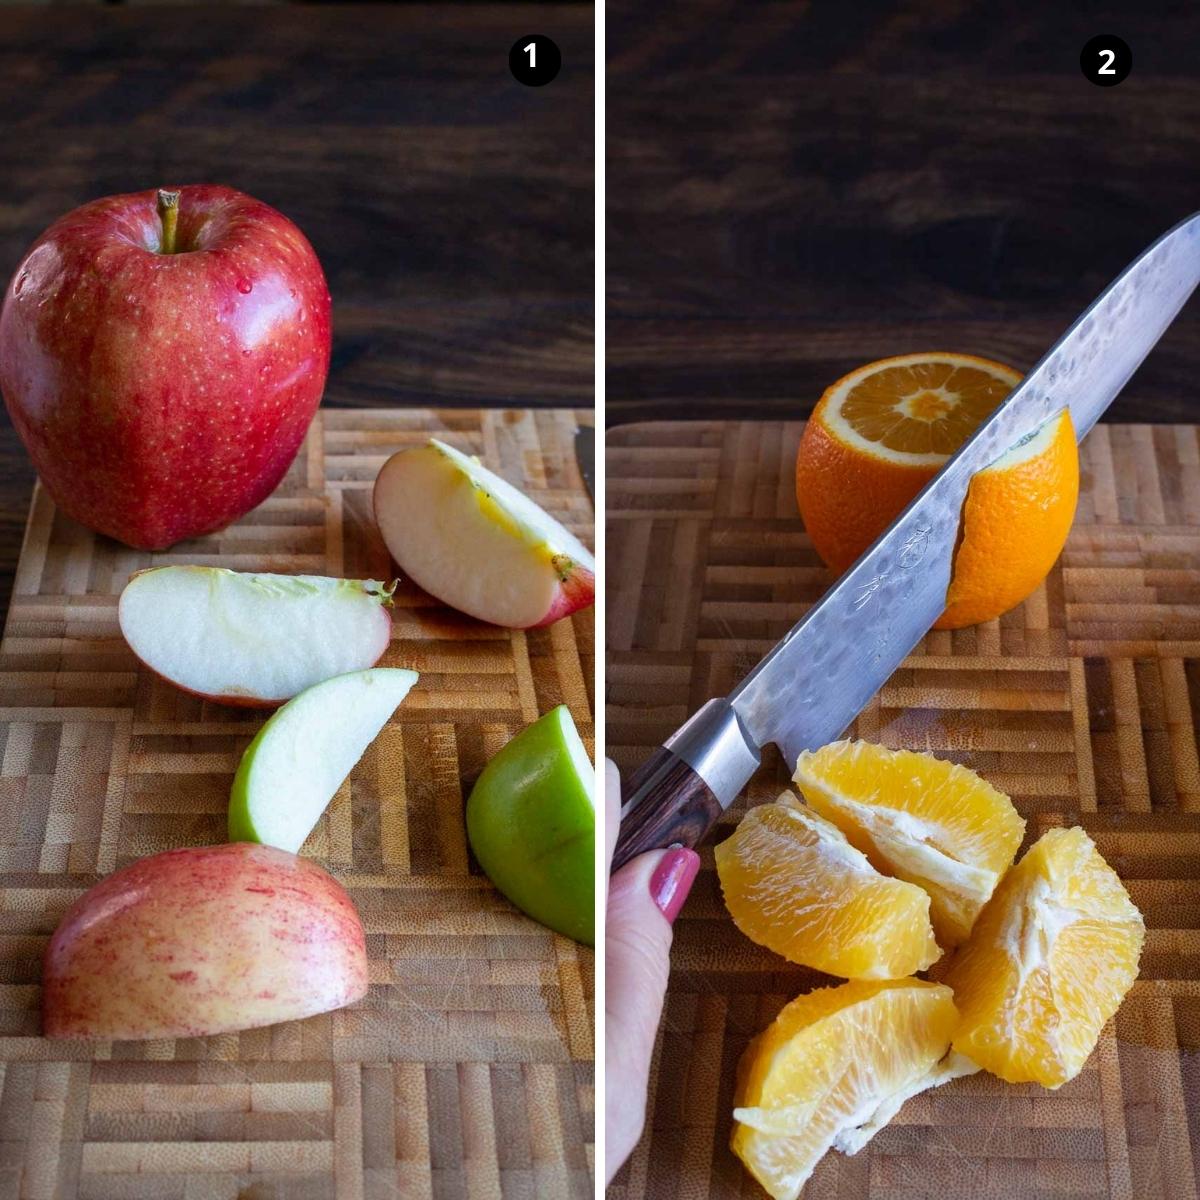 Cutting up apples and removing peel from oranges.